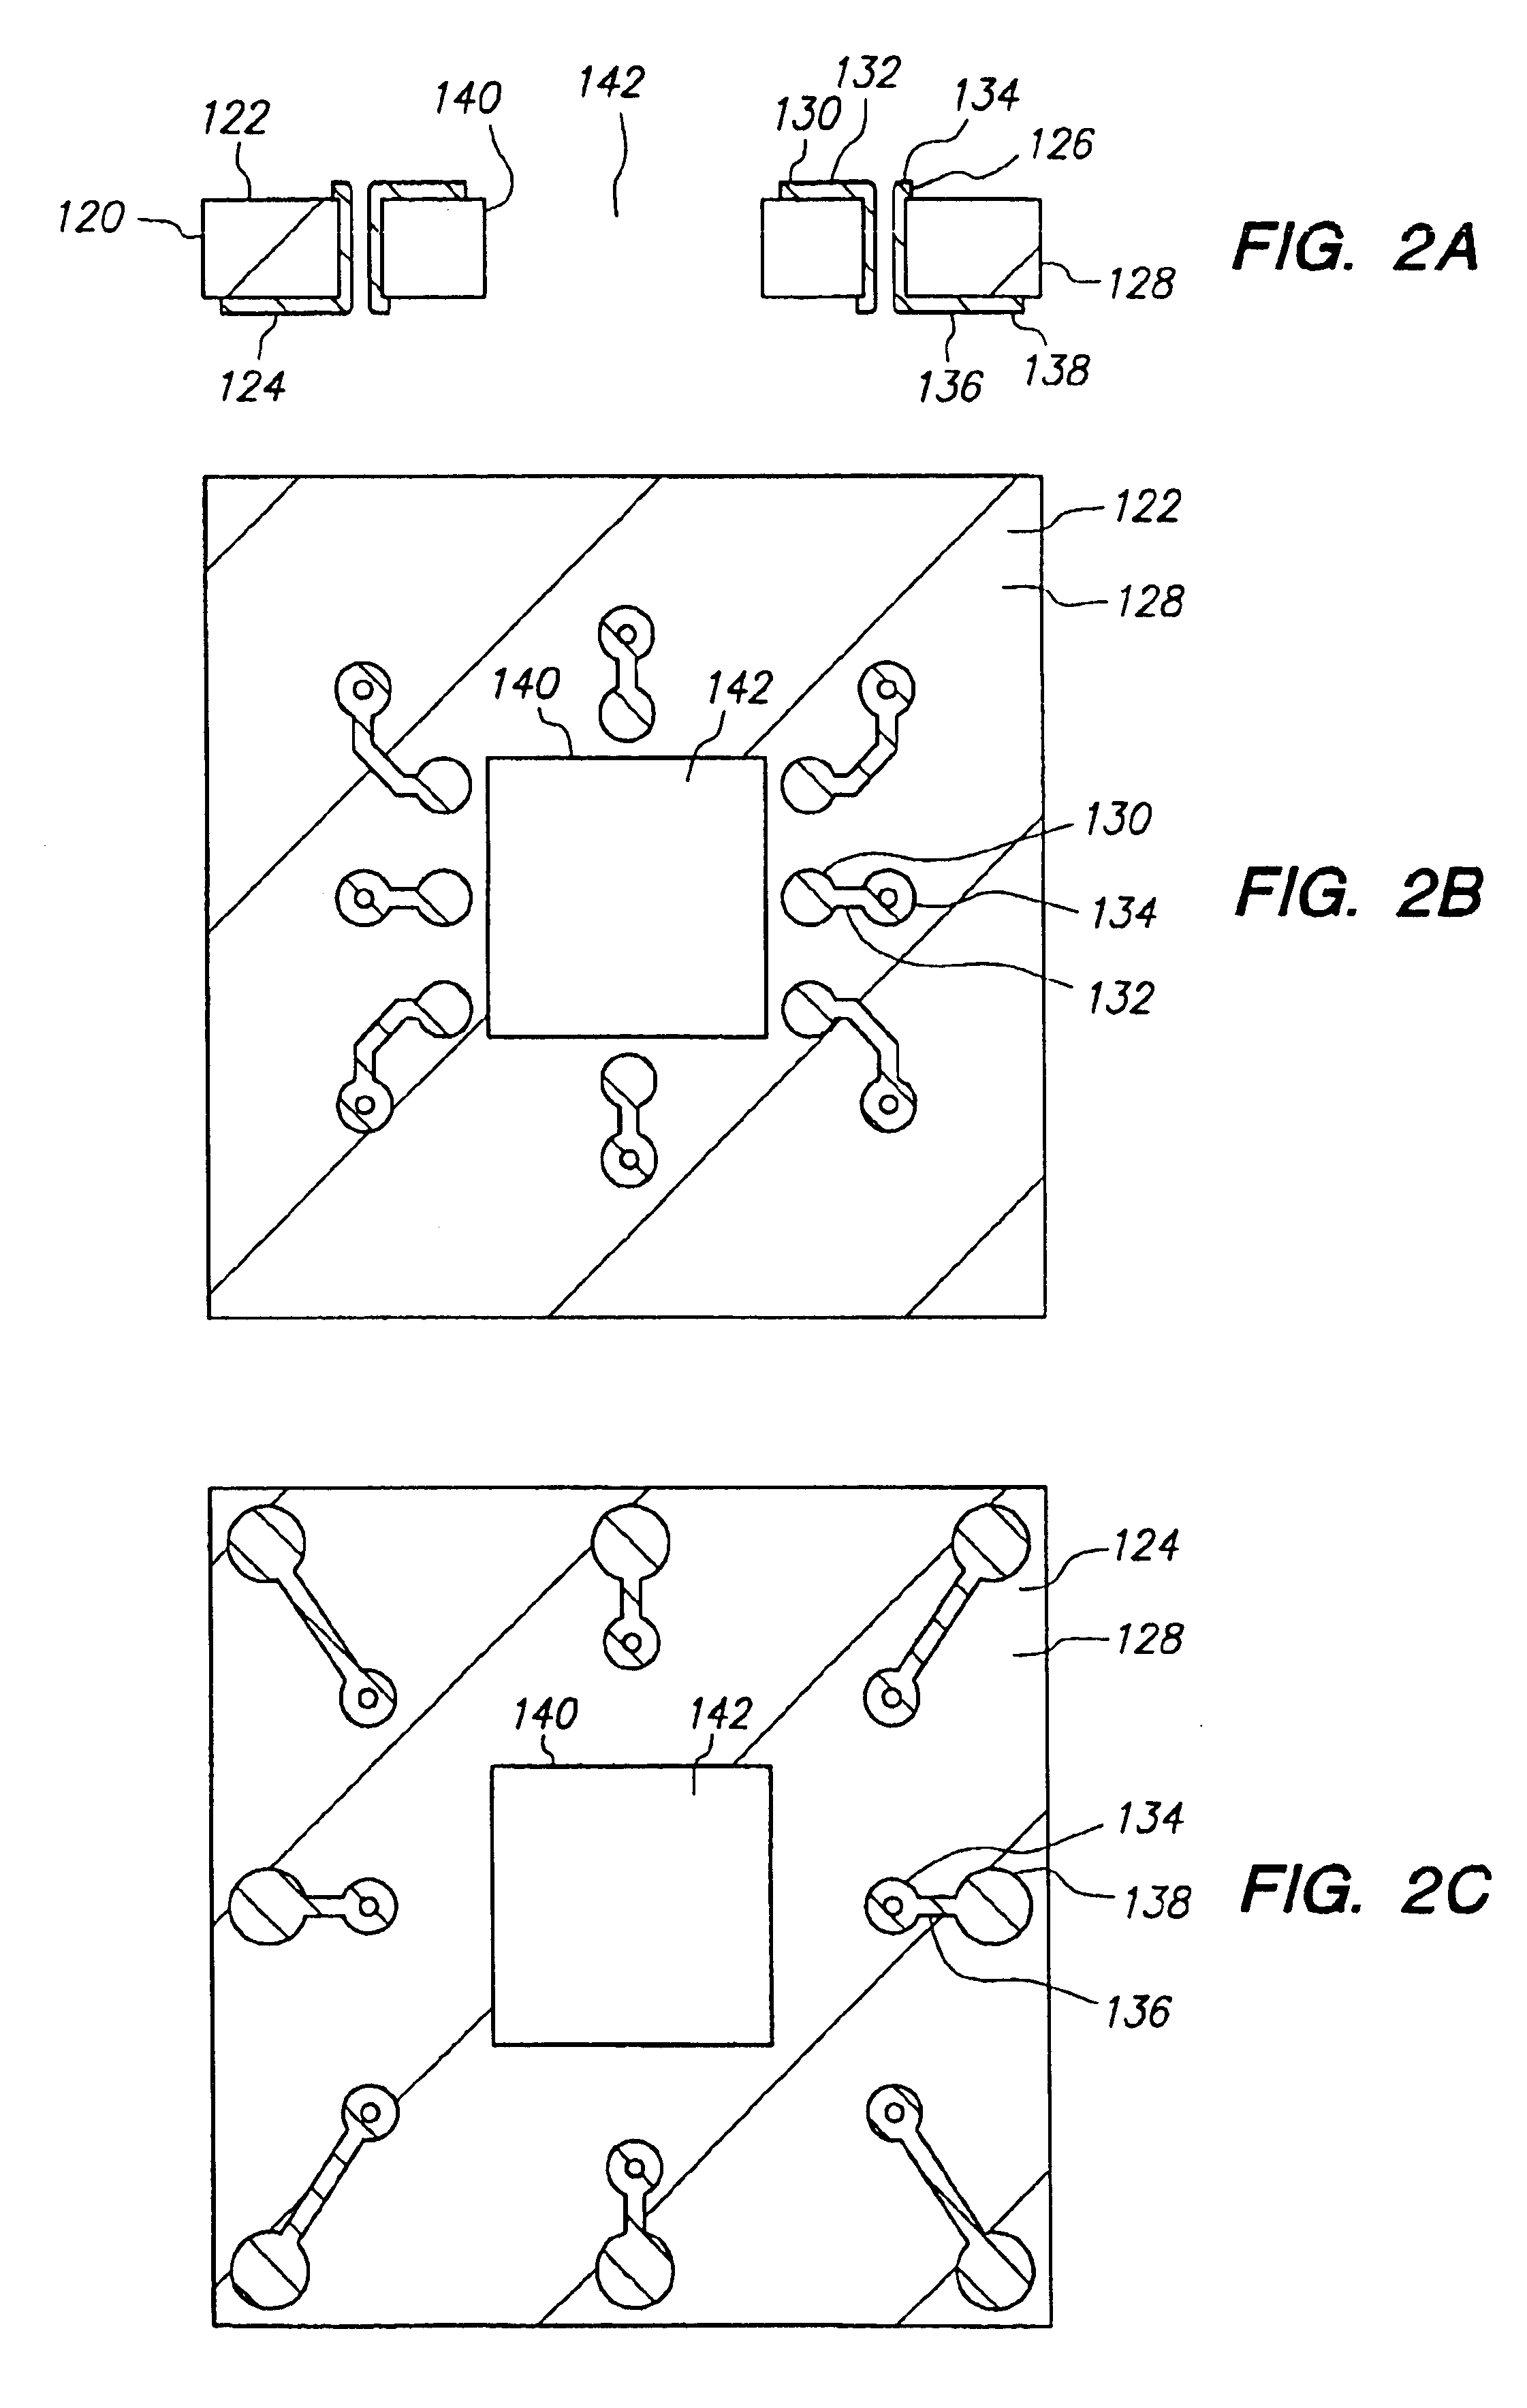 Method of making a semiconductor chip assembly with a conductive trace and a substrate